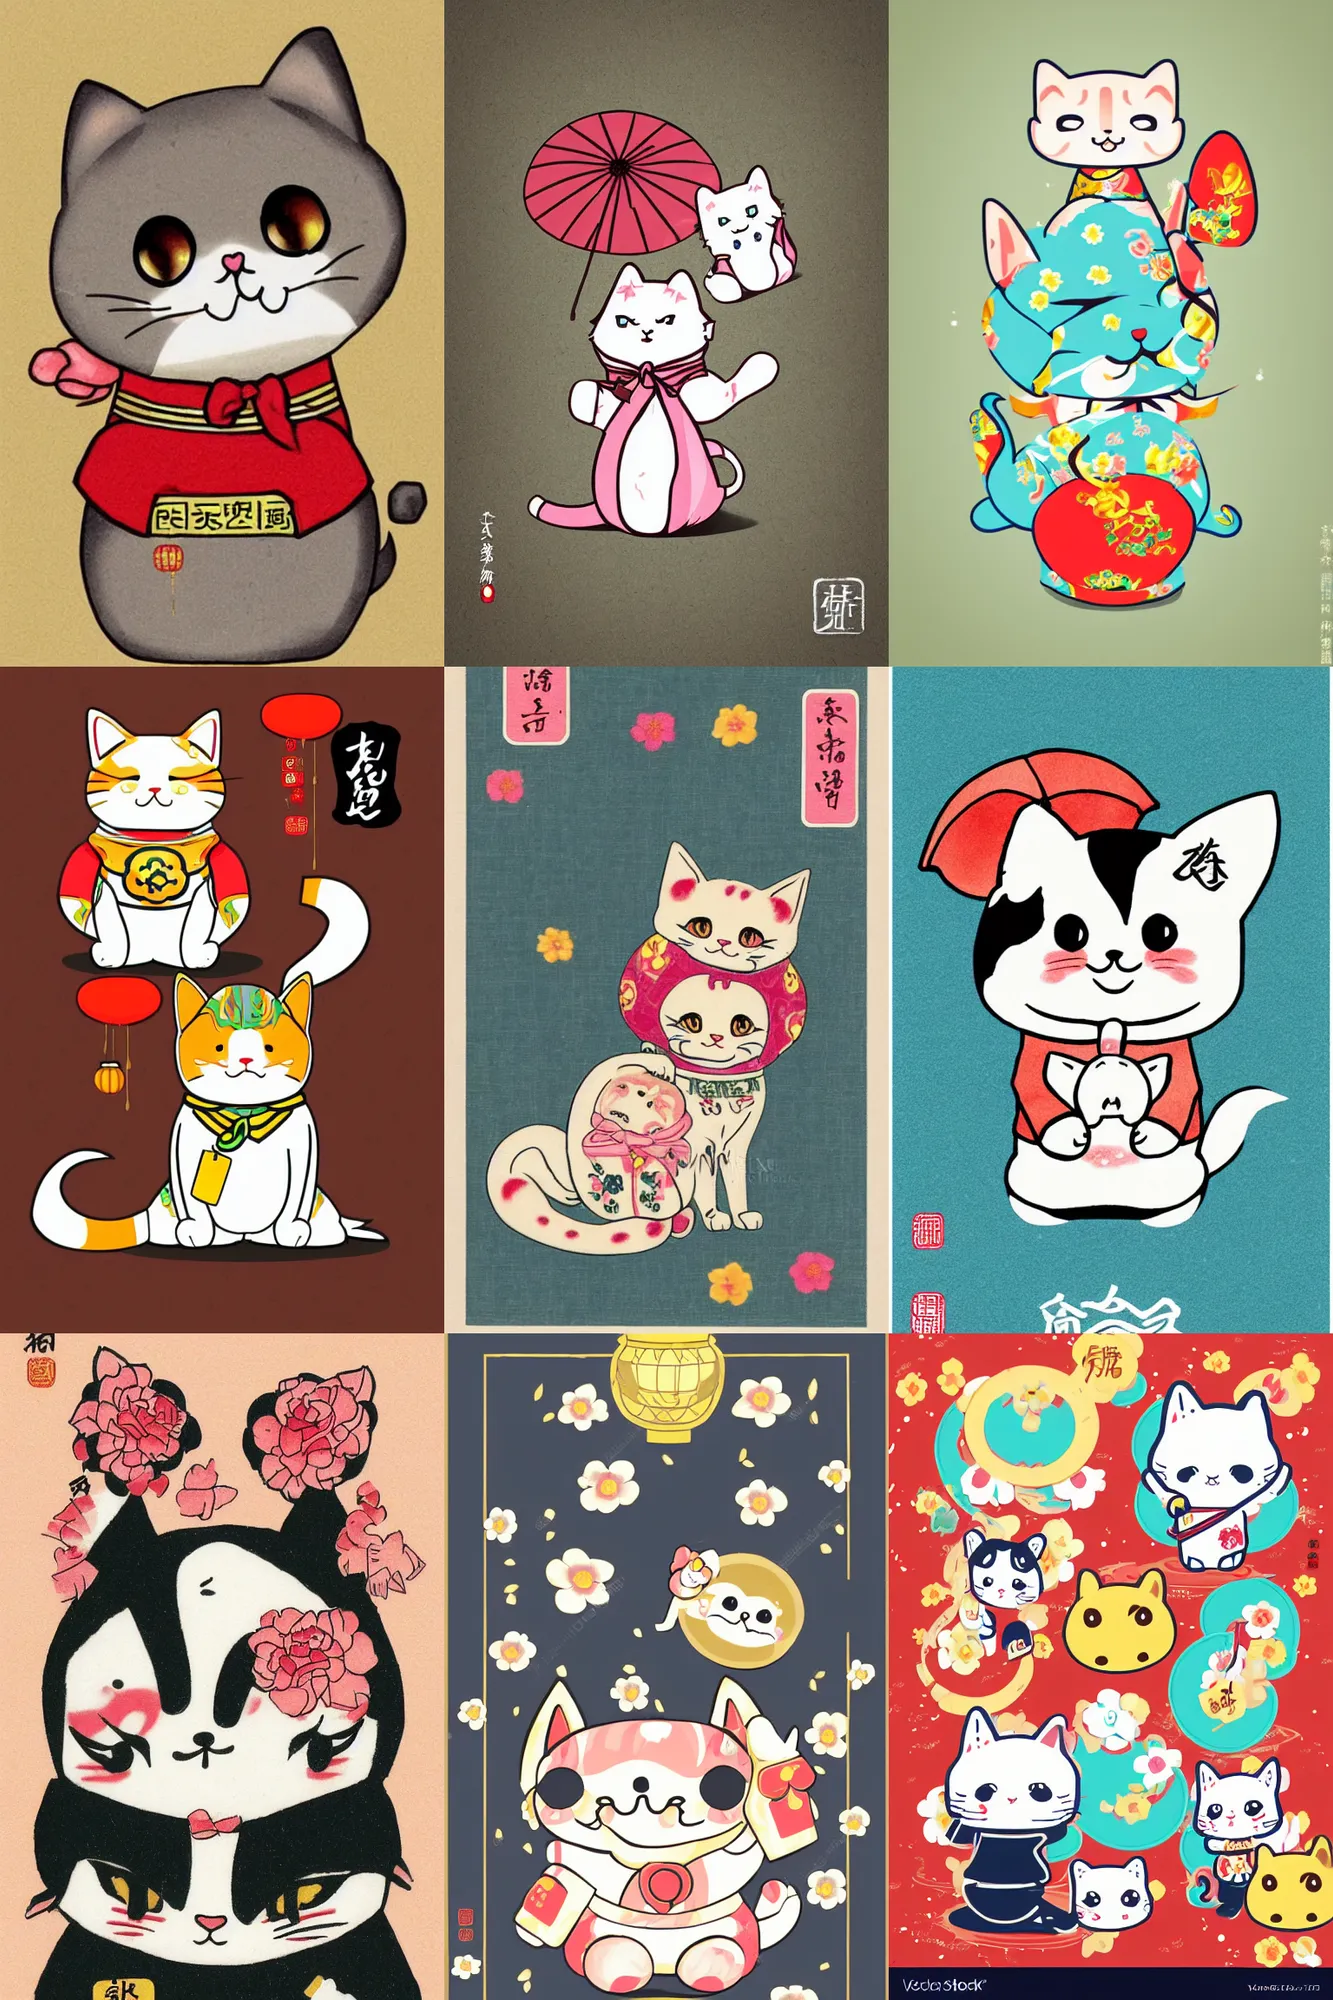 Prompt: Kawaii illustration a Chinese lucky cat, Japanese chibi